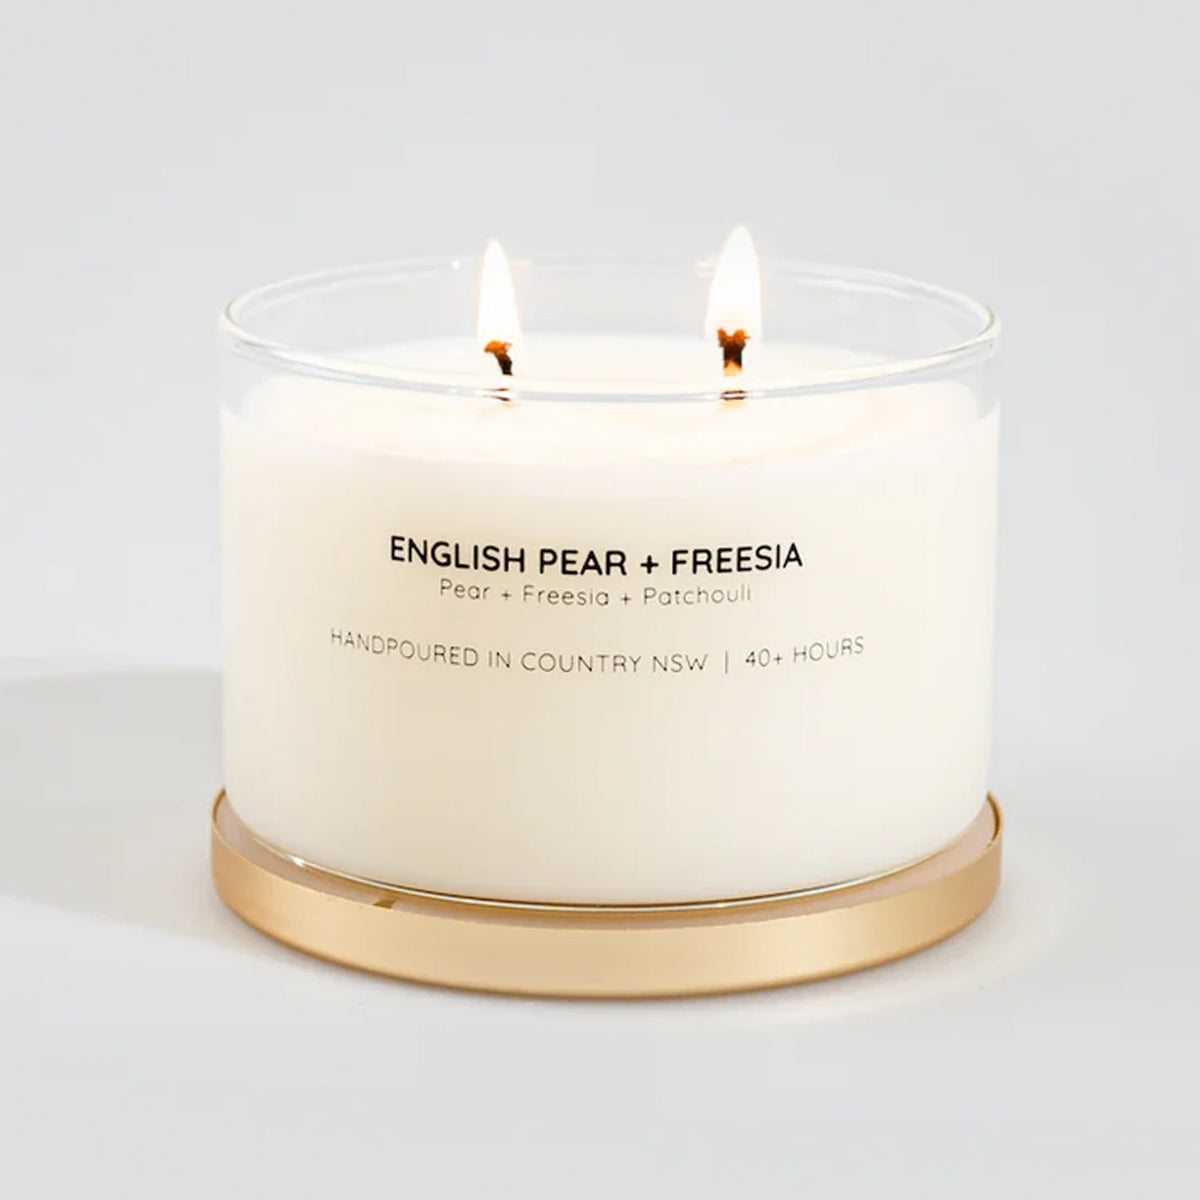 100% Natural Soy Wax "English Pear & Freesia" Candle from Australia (330g)